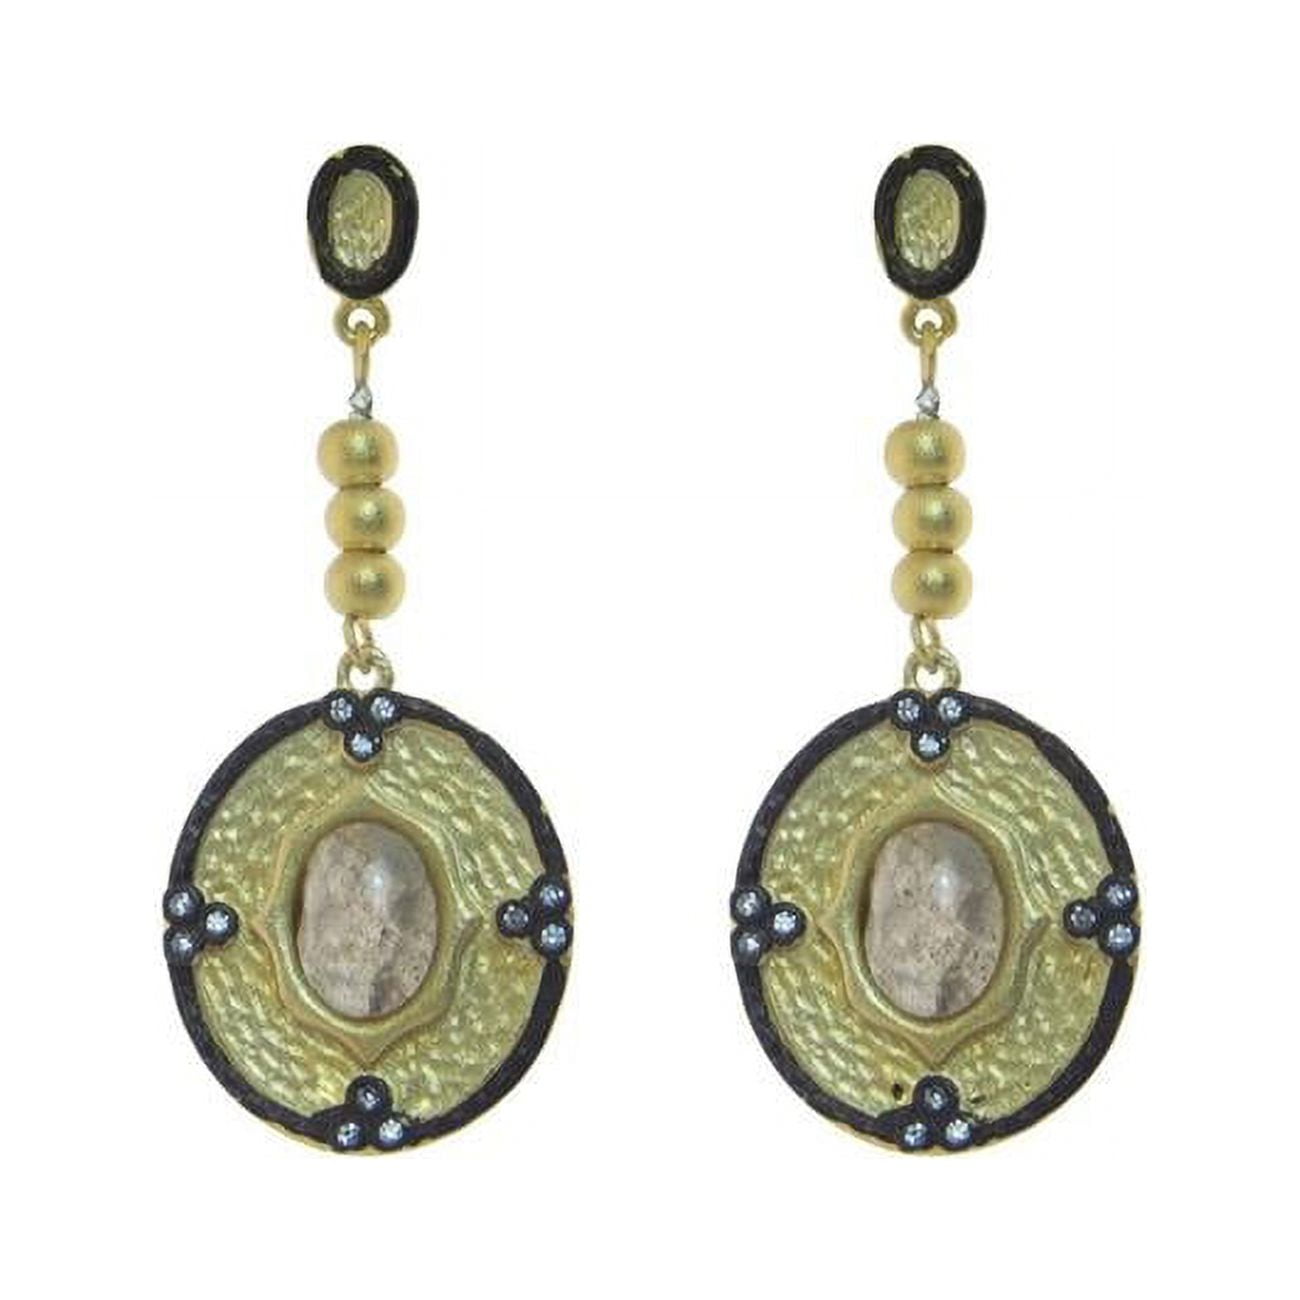 Picture of Fronay 215277 1.25 in. Athena Labradorite Oval Hoop Earrings in Gold Plated Sterling Silver